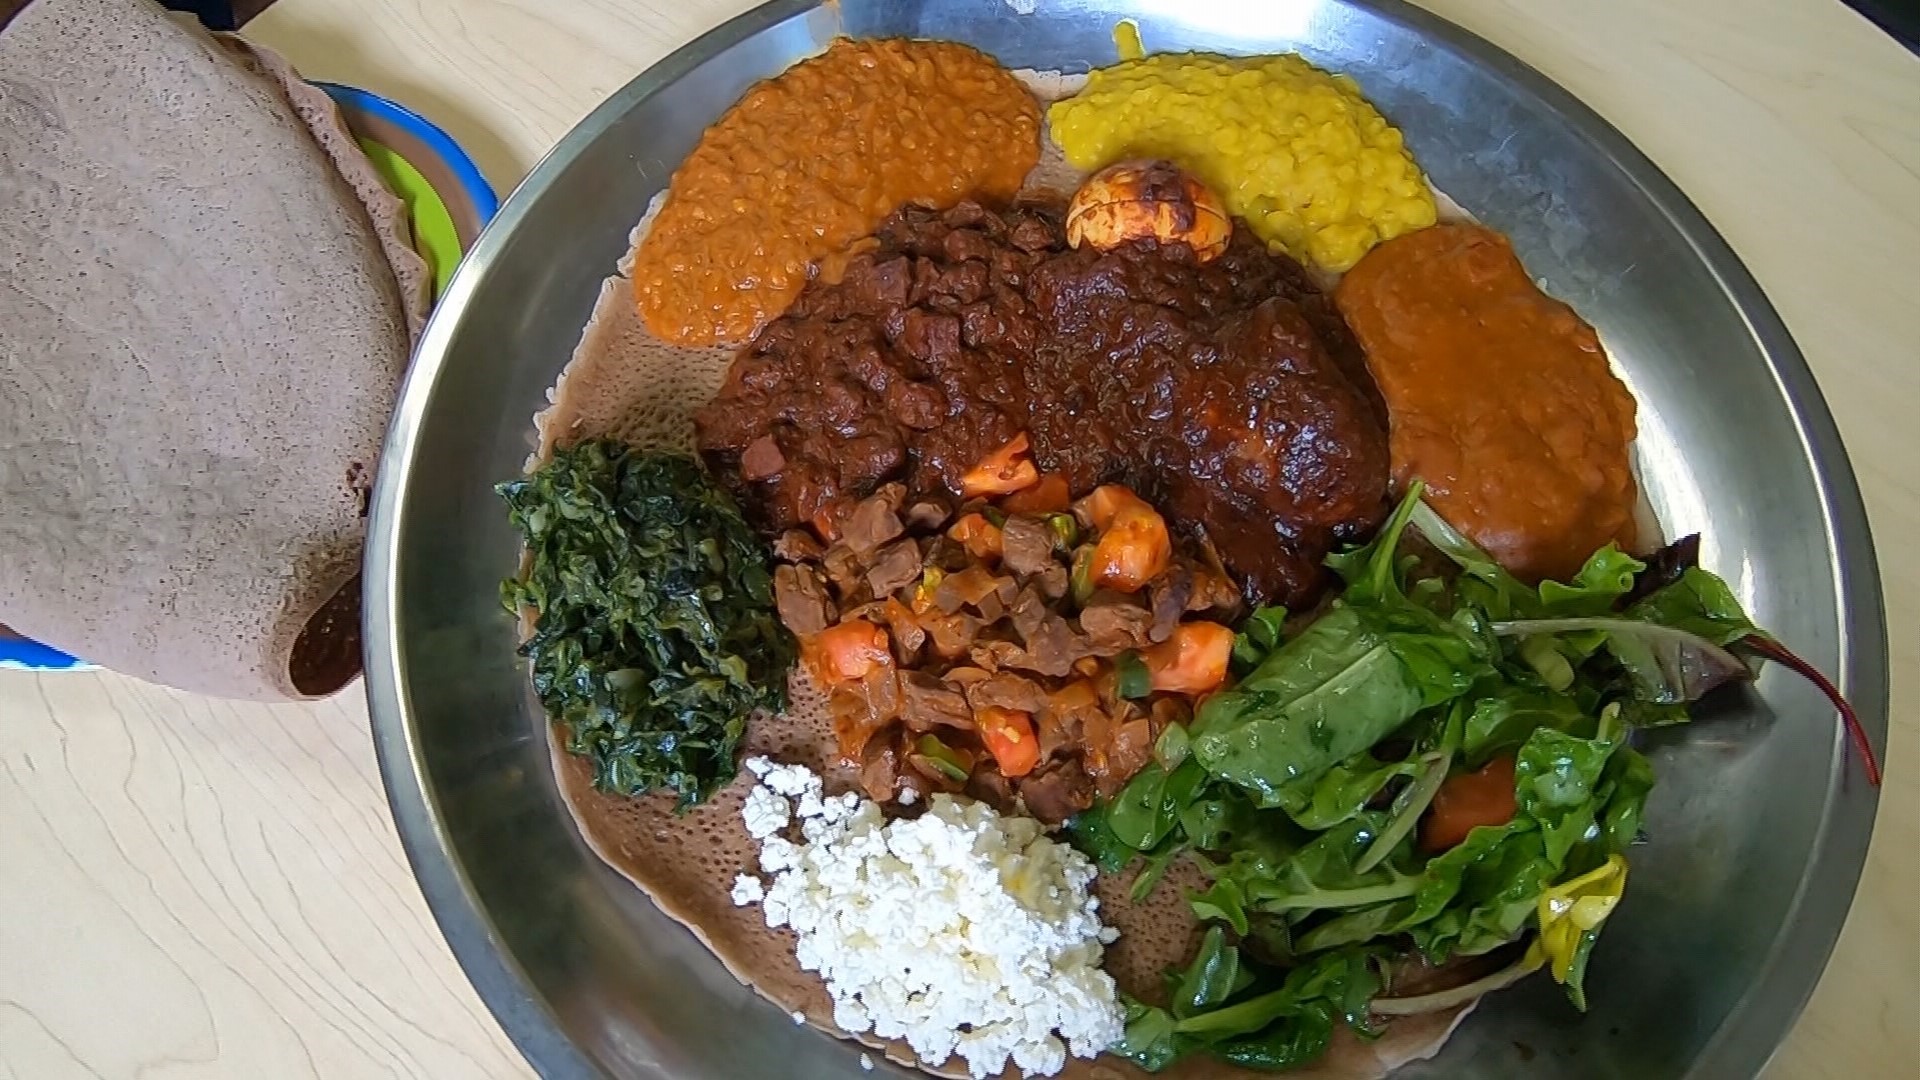 You won't get in trouble for eating with your hands here. From meat-based dishes to vegan and gluten-free delights, Ethiopian food has something for everyone.